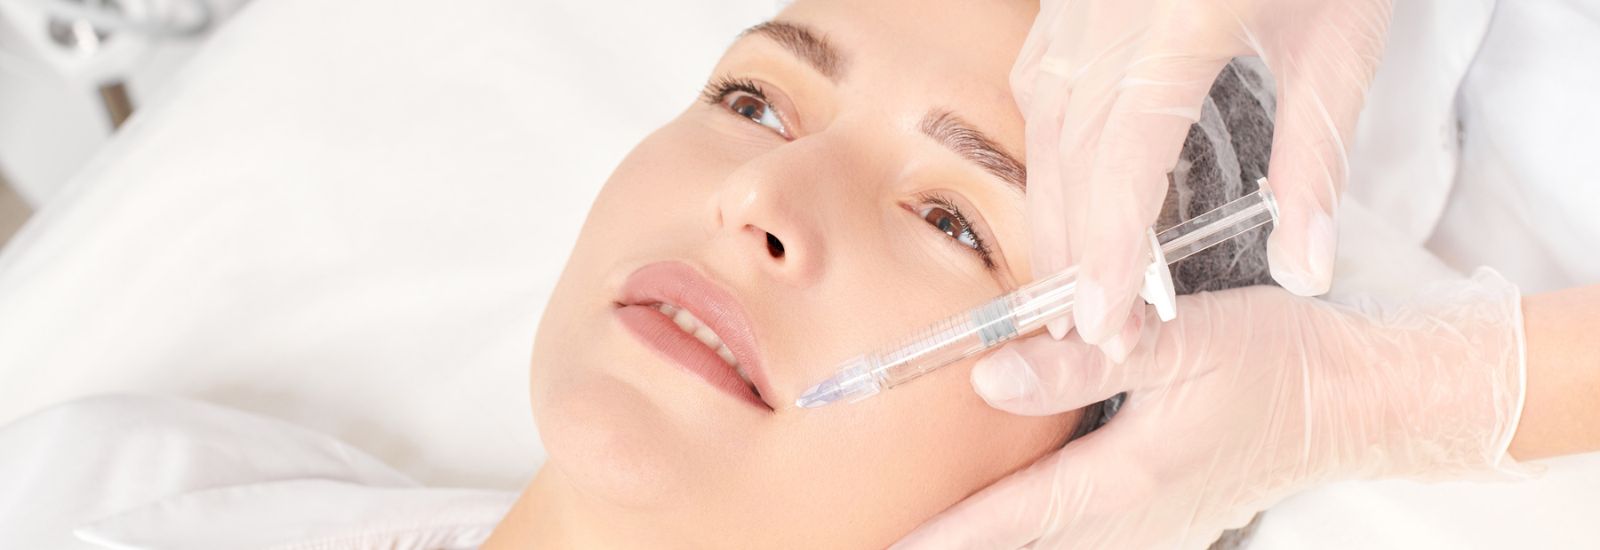 Cosmetologist makes fillers injection for lips augmentation - Restylane